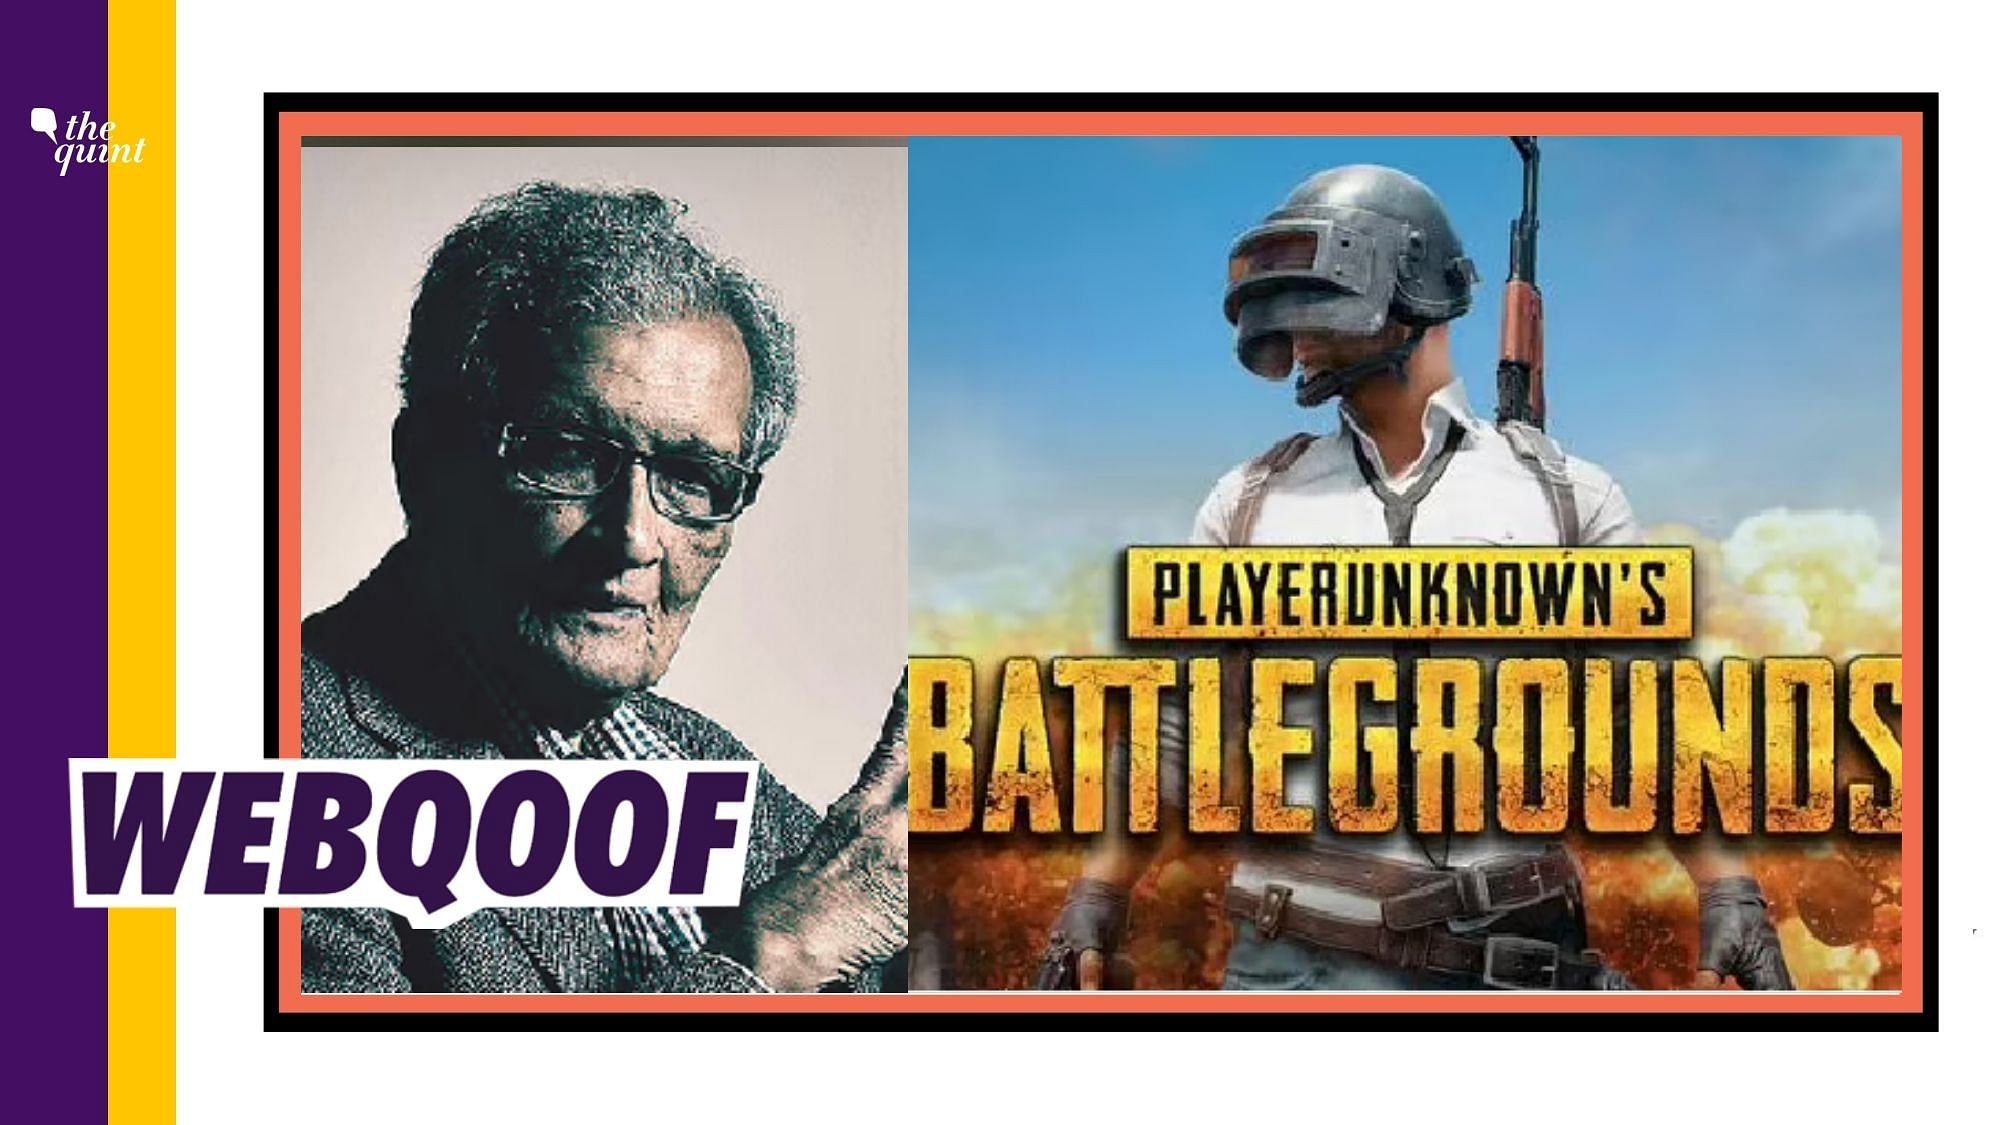 A quote on the effect of PUBG ban on the Indian economy is being falsely attributed to Nobel Laureate Amartya Sen.